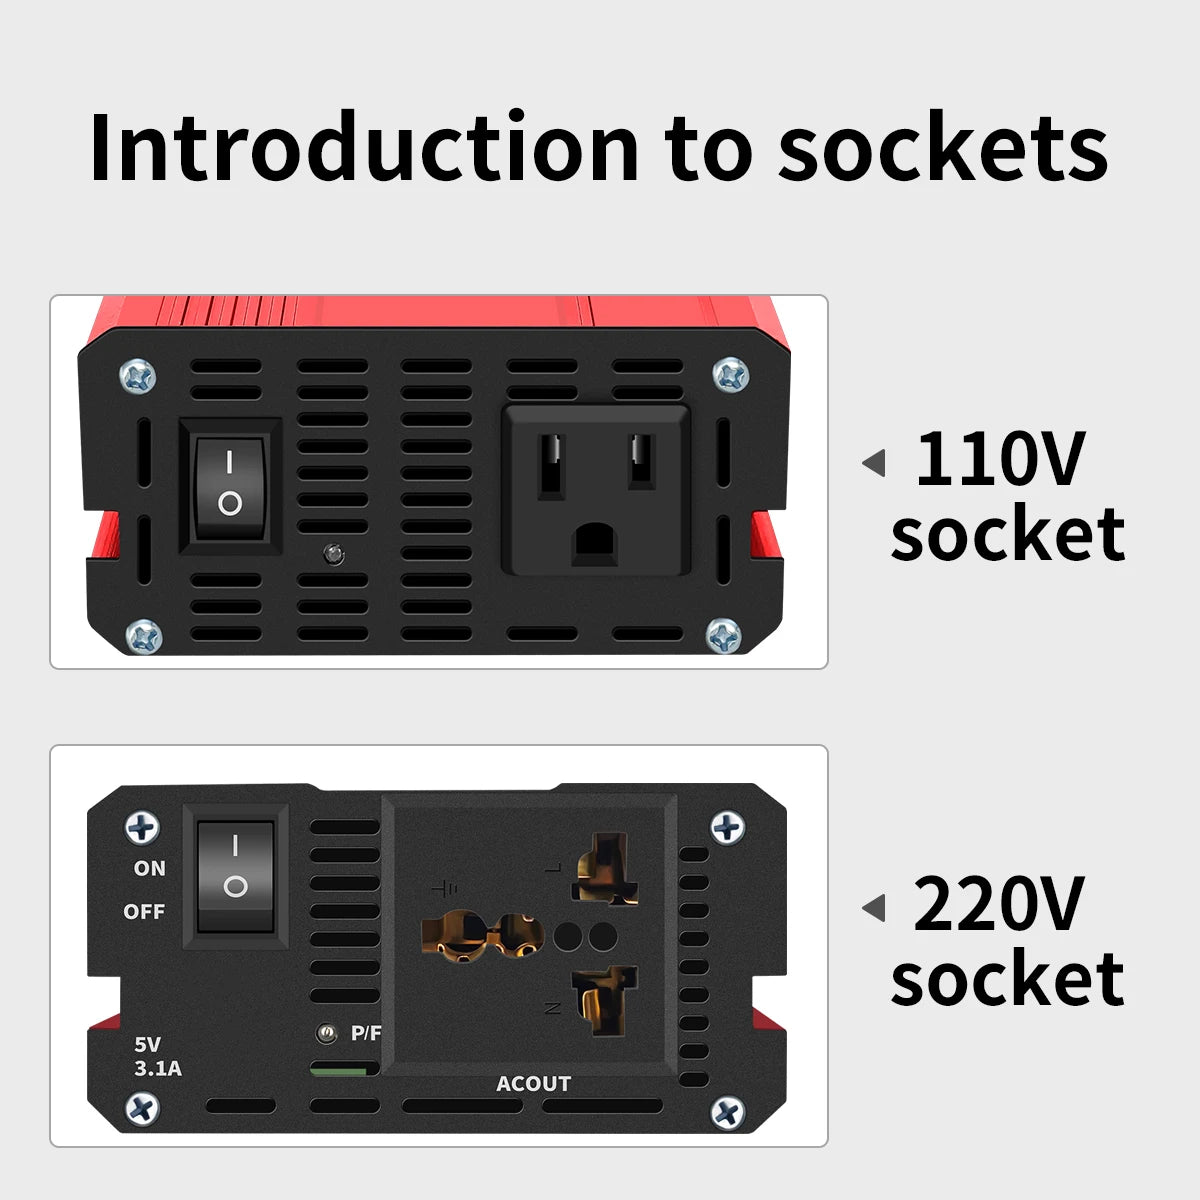 Universal power inverter with indicators for voltage and waveform, suitable for 110V and 220V use.